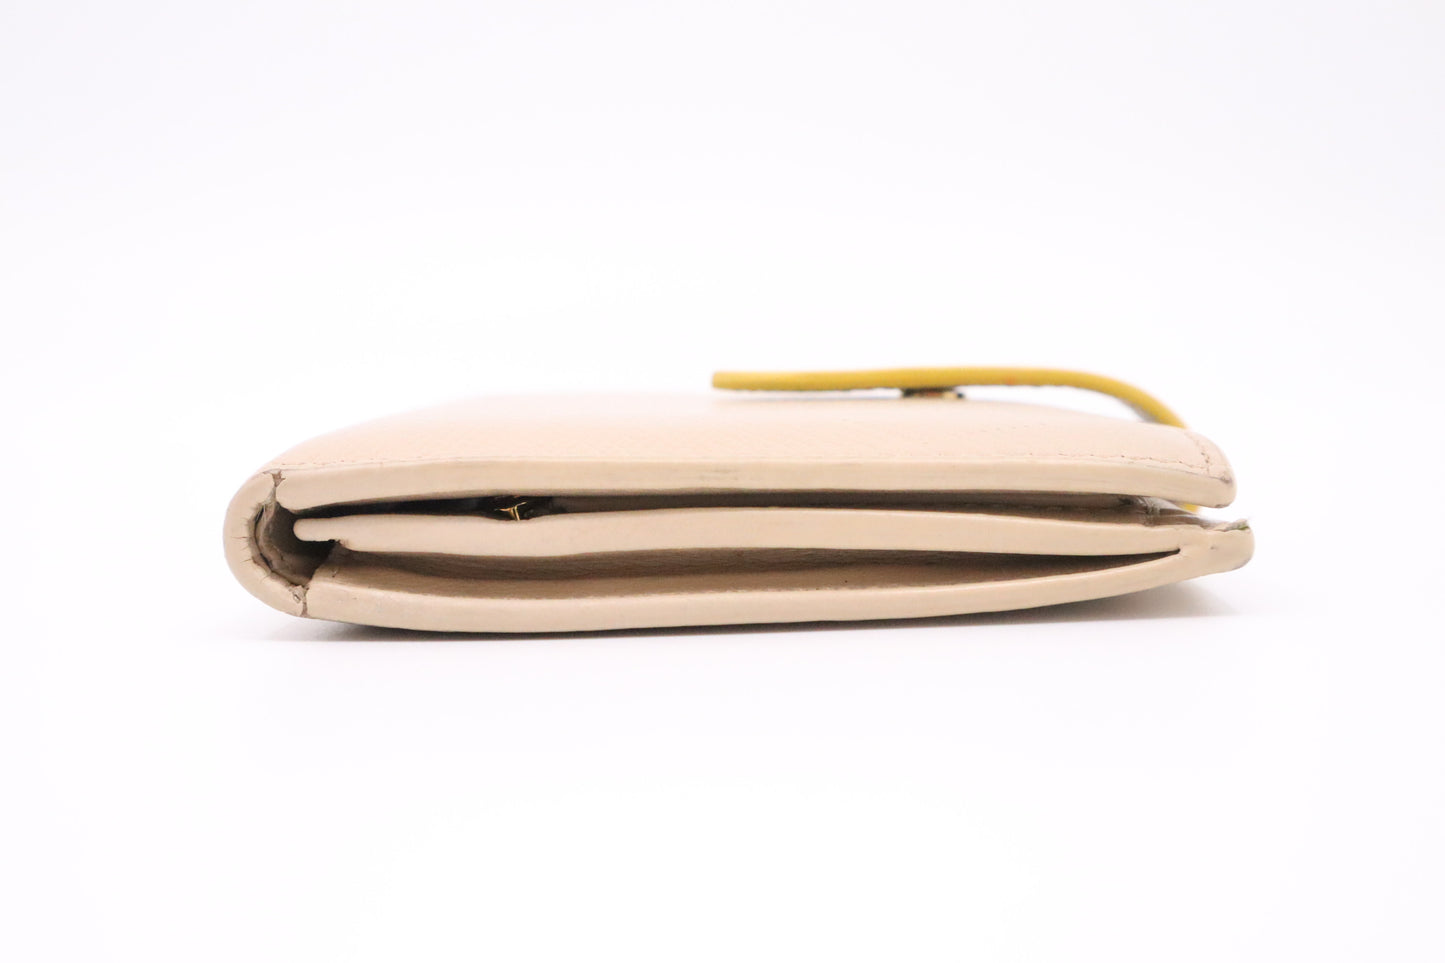 Celine Compact Wallet in Beige and Yellow Leather